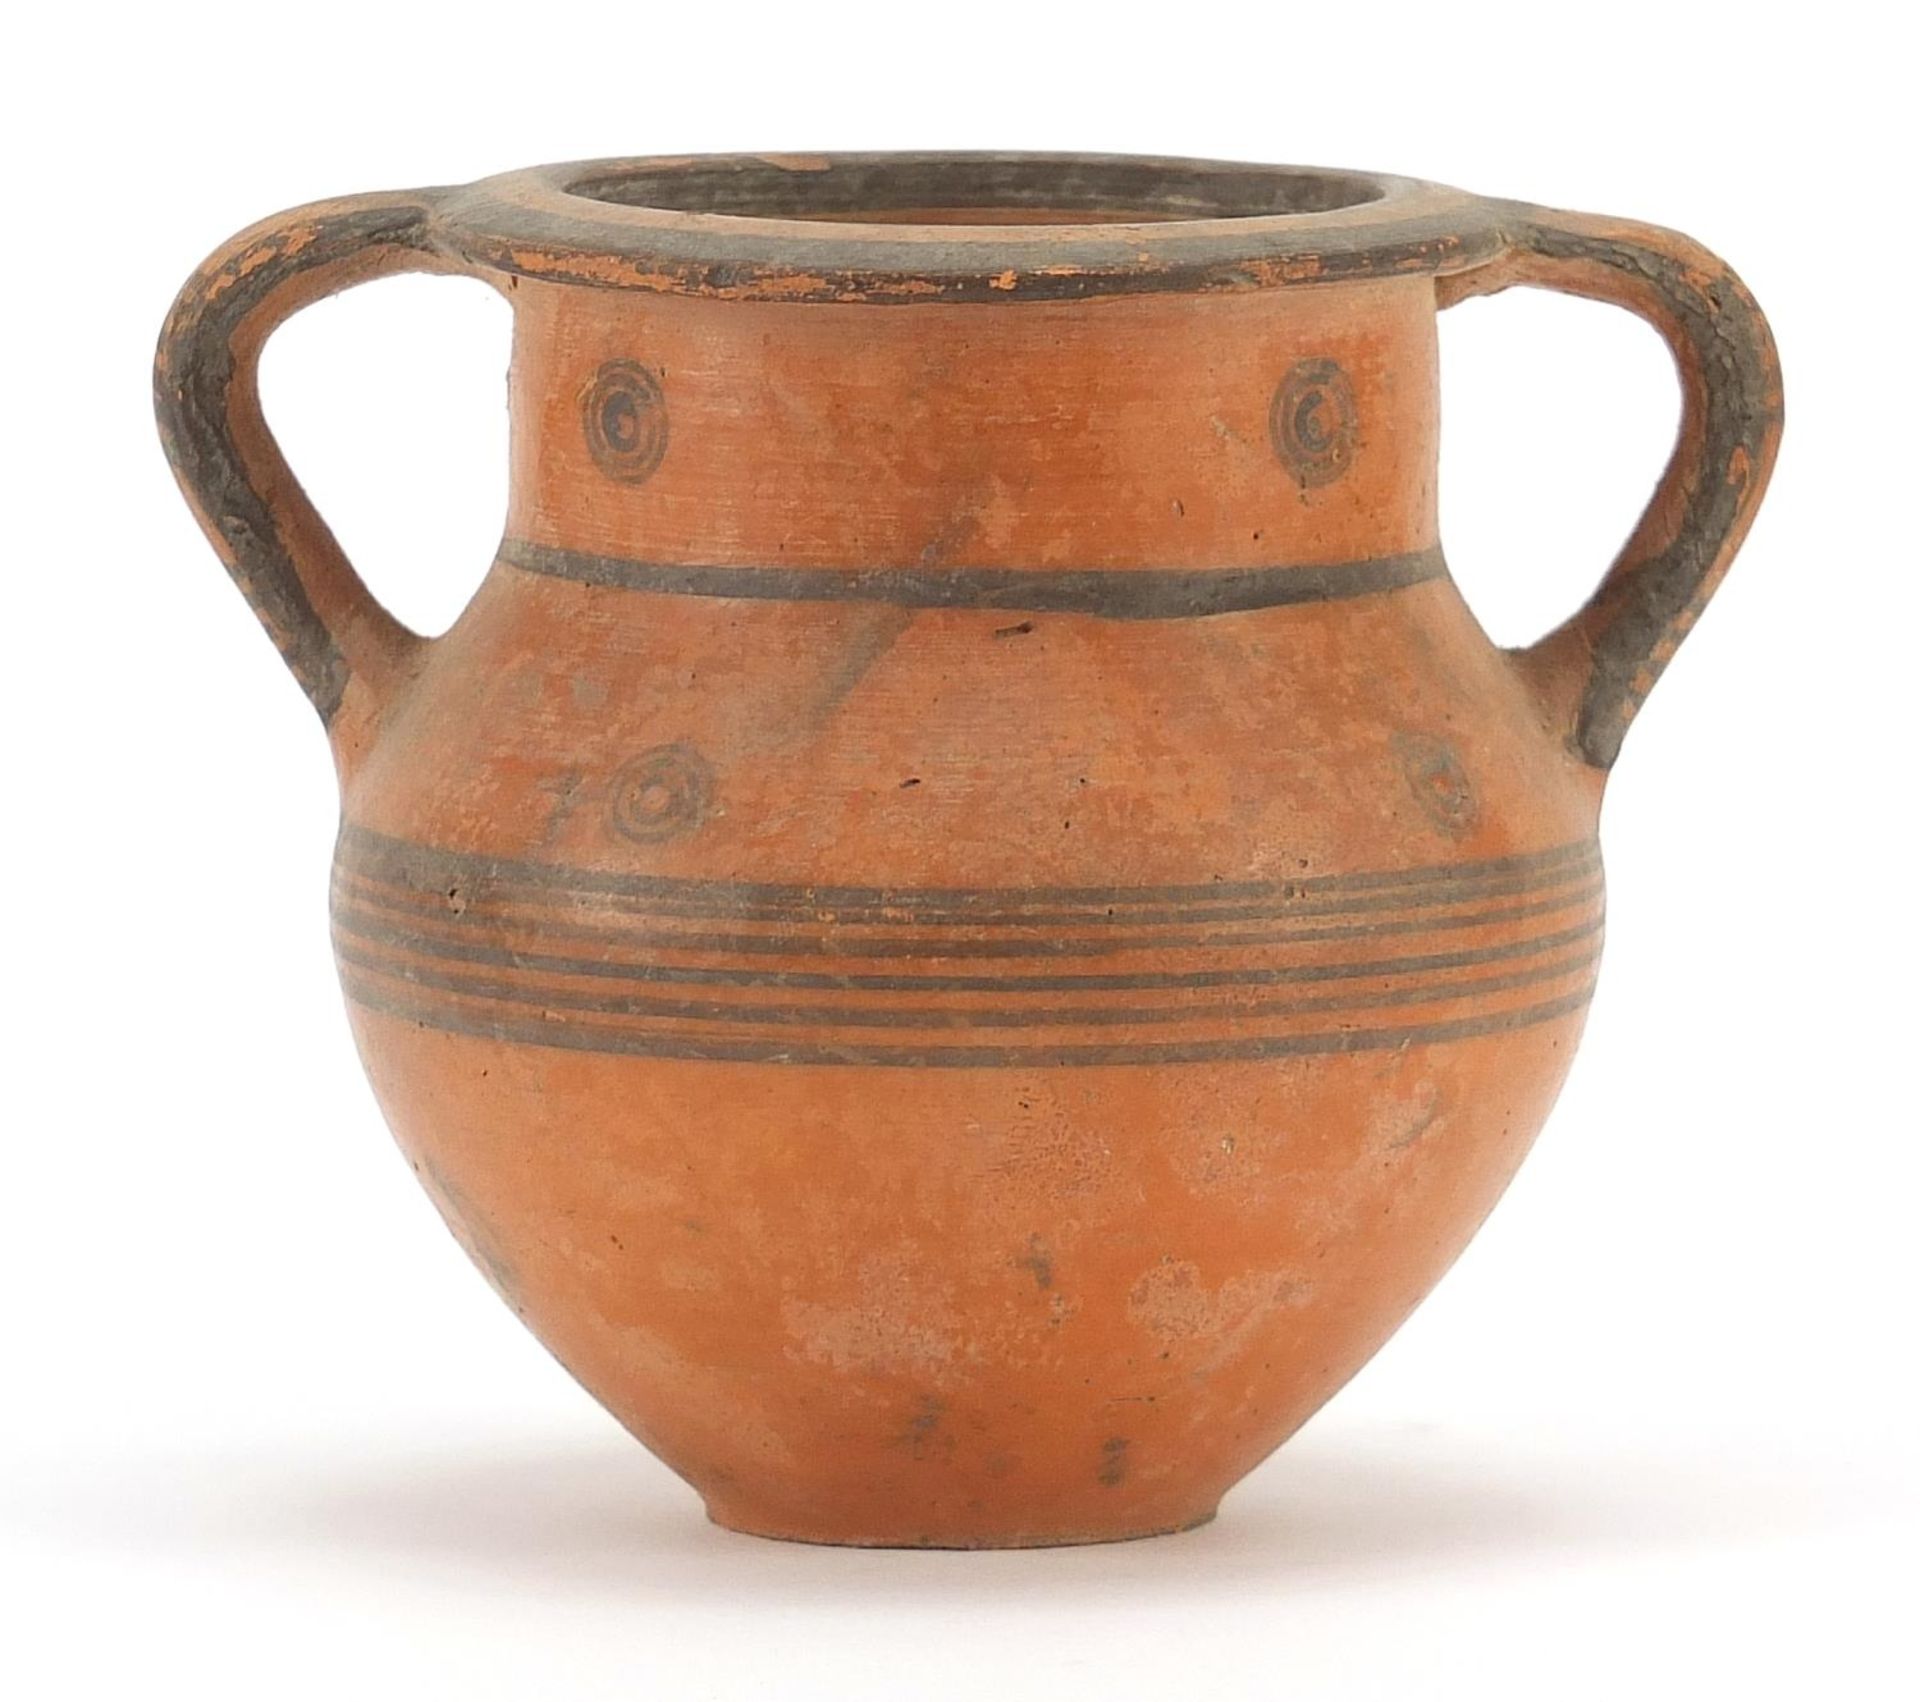 Cypriot miniature pottery krater with twin handles, 8.5cm high